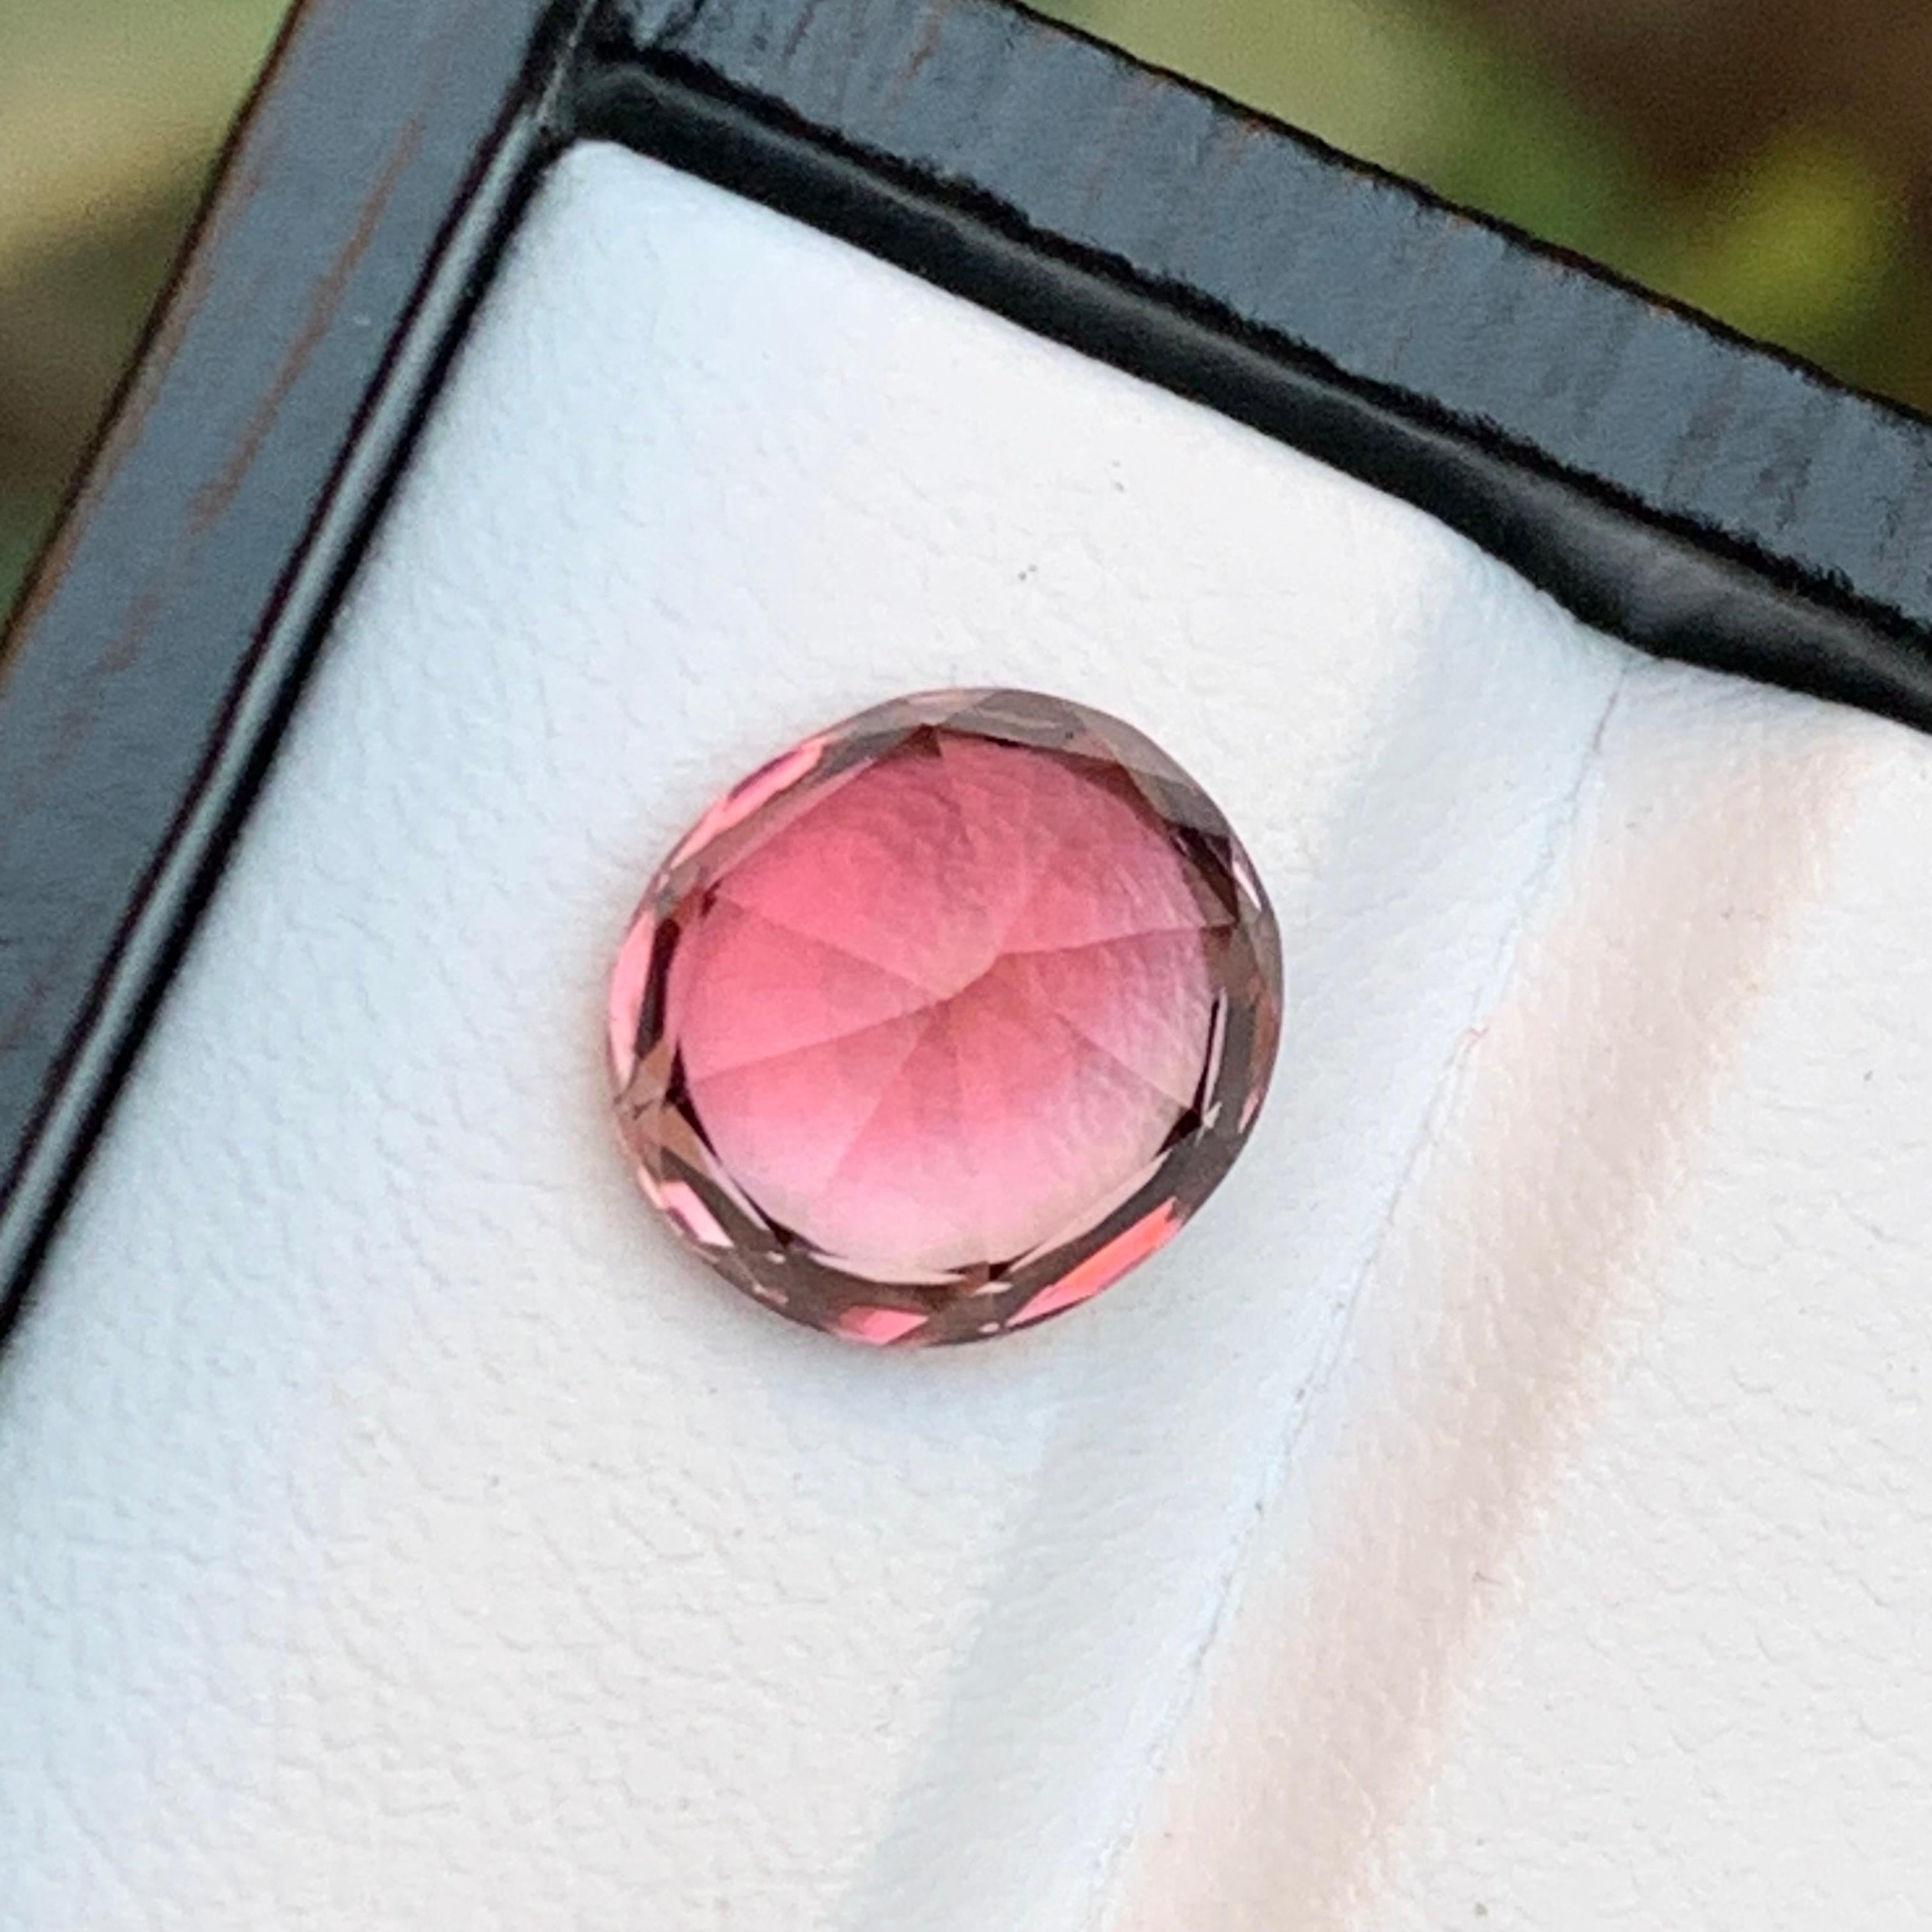 Women's or Men's Rare Peachy Pink Natural Tourmaline Gemstone, 3.80 Ct Fancy Cushion Cut for Ring For Sale